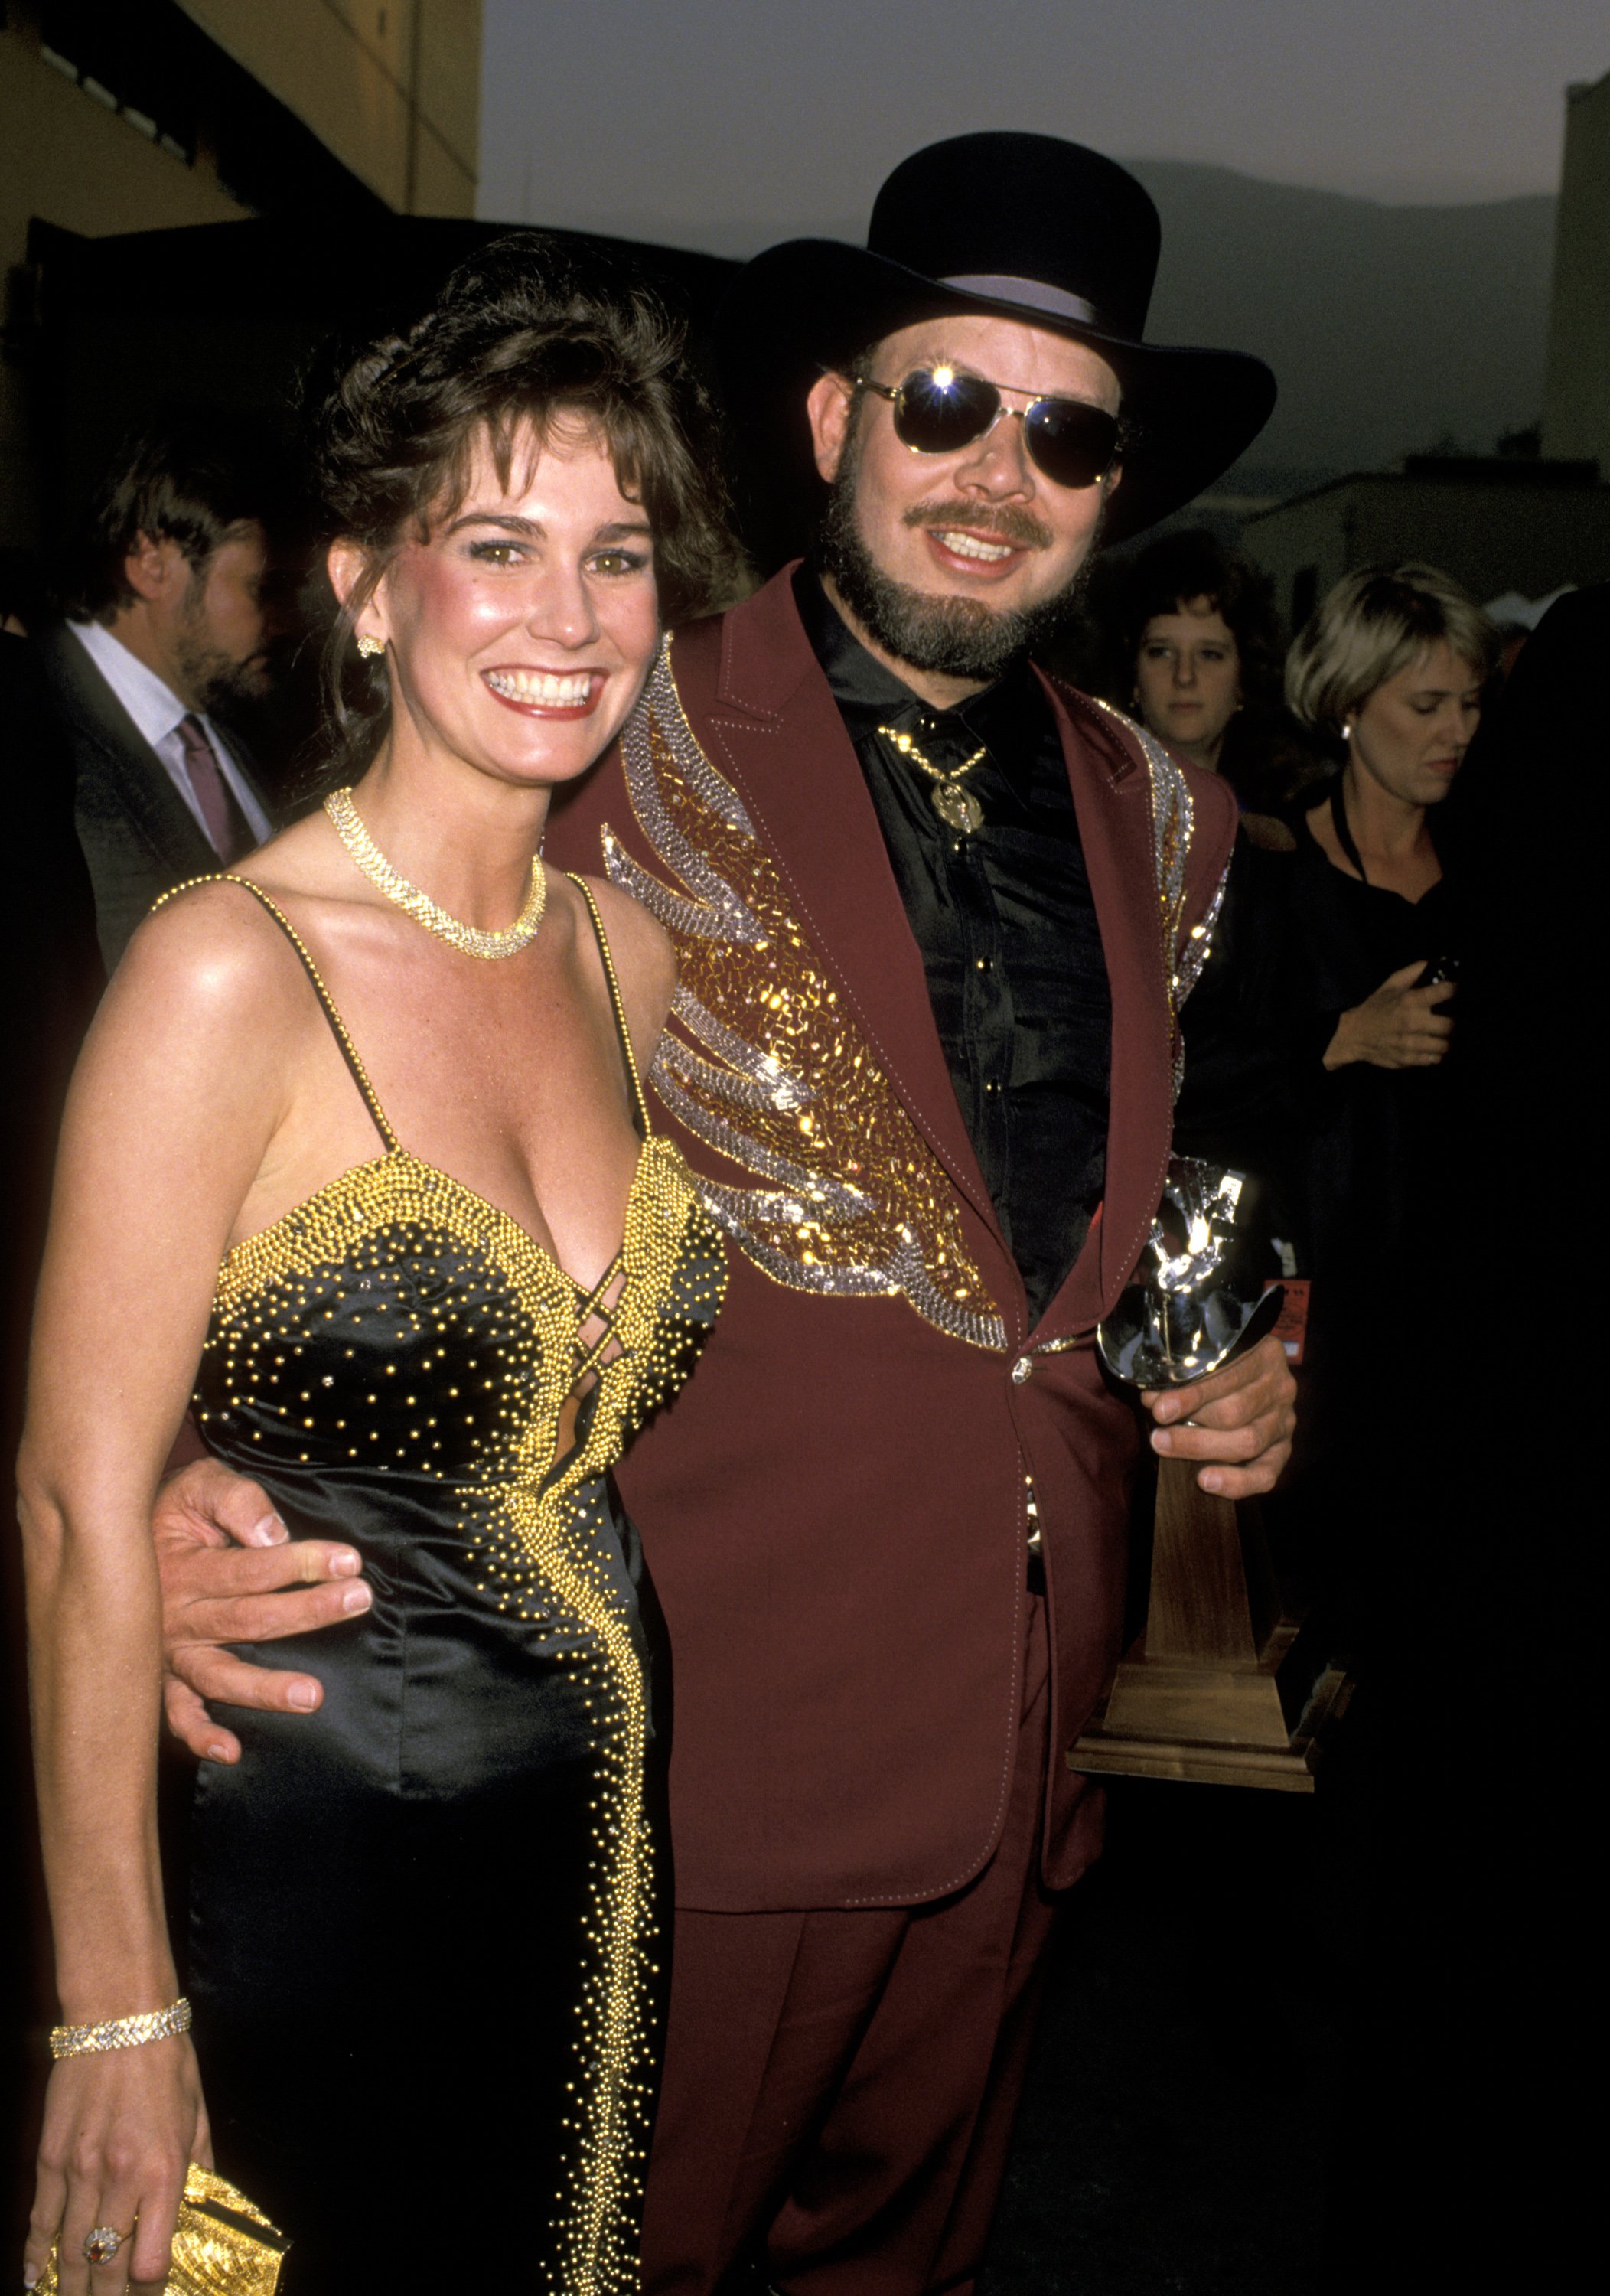 Mary Jane Thomas and Hank Williams Jr. during the 24th Annual Academy of Country Music Awards in Los Angeles, California, on April 10, 1989. | Source: Getty Images